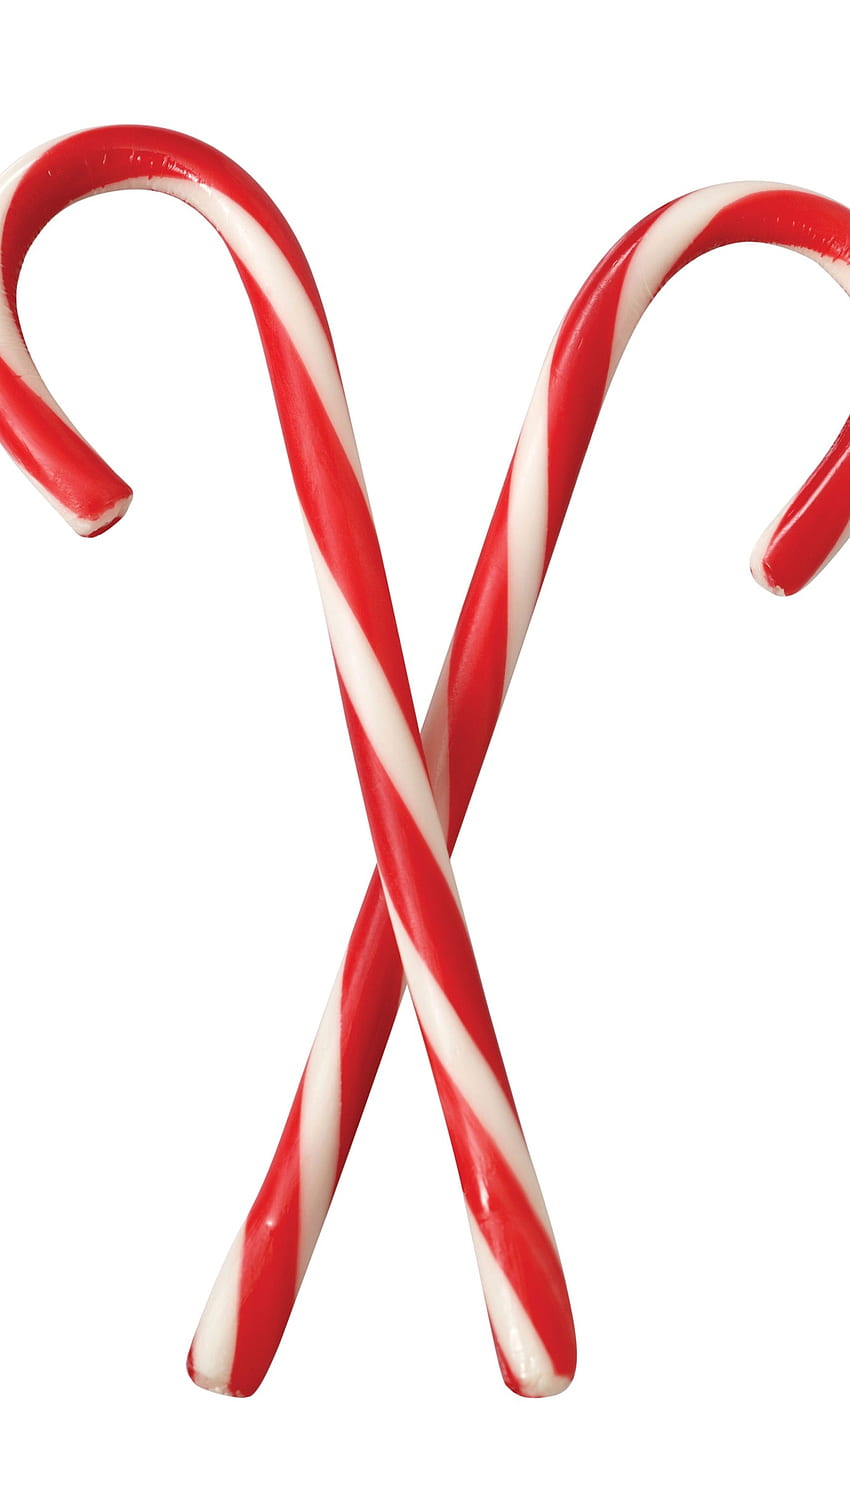 Two candy canes that are crossed over each other - Candy cane